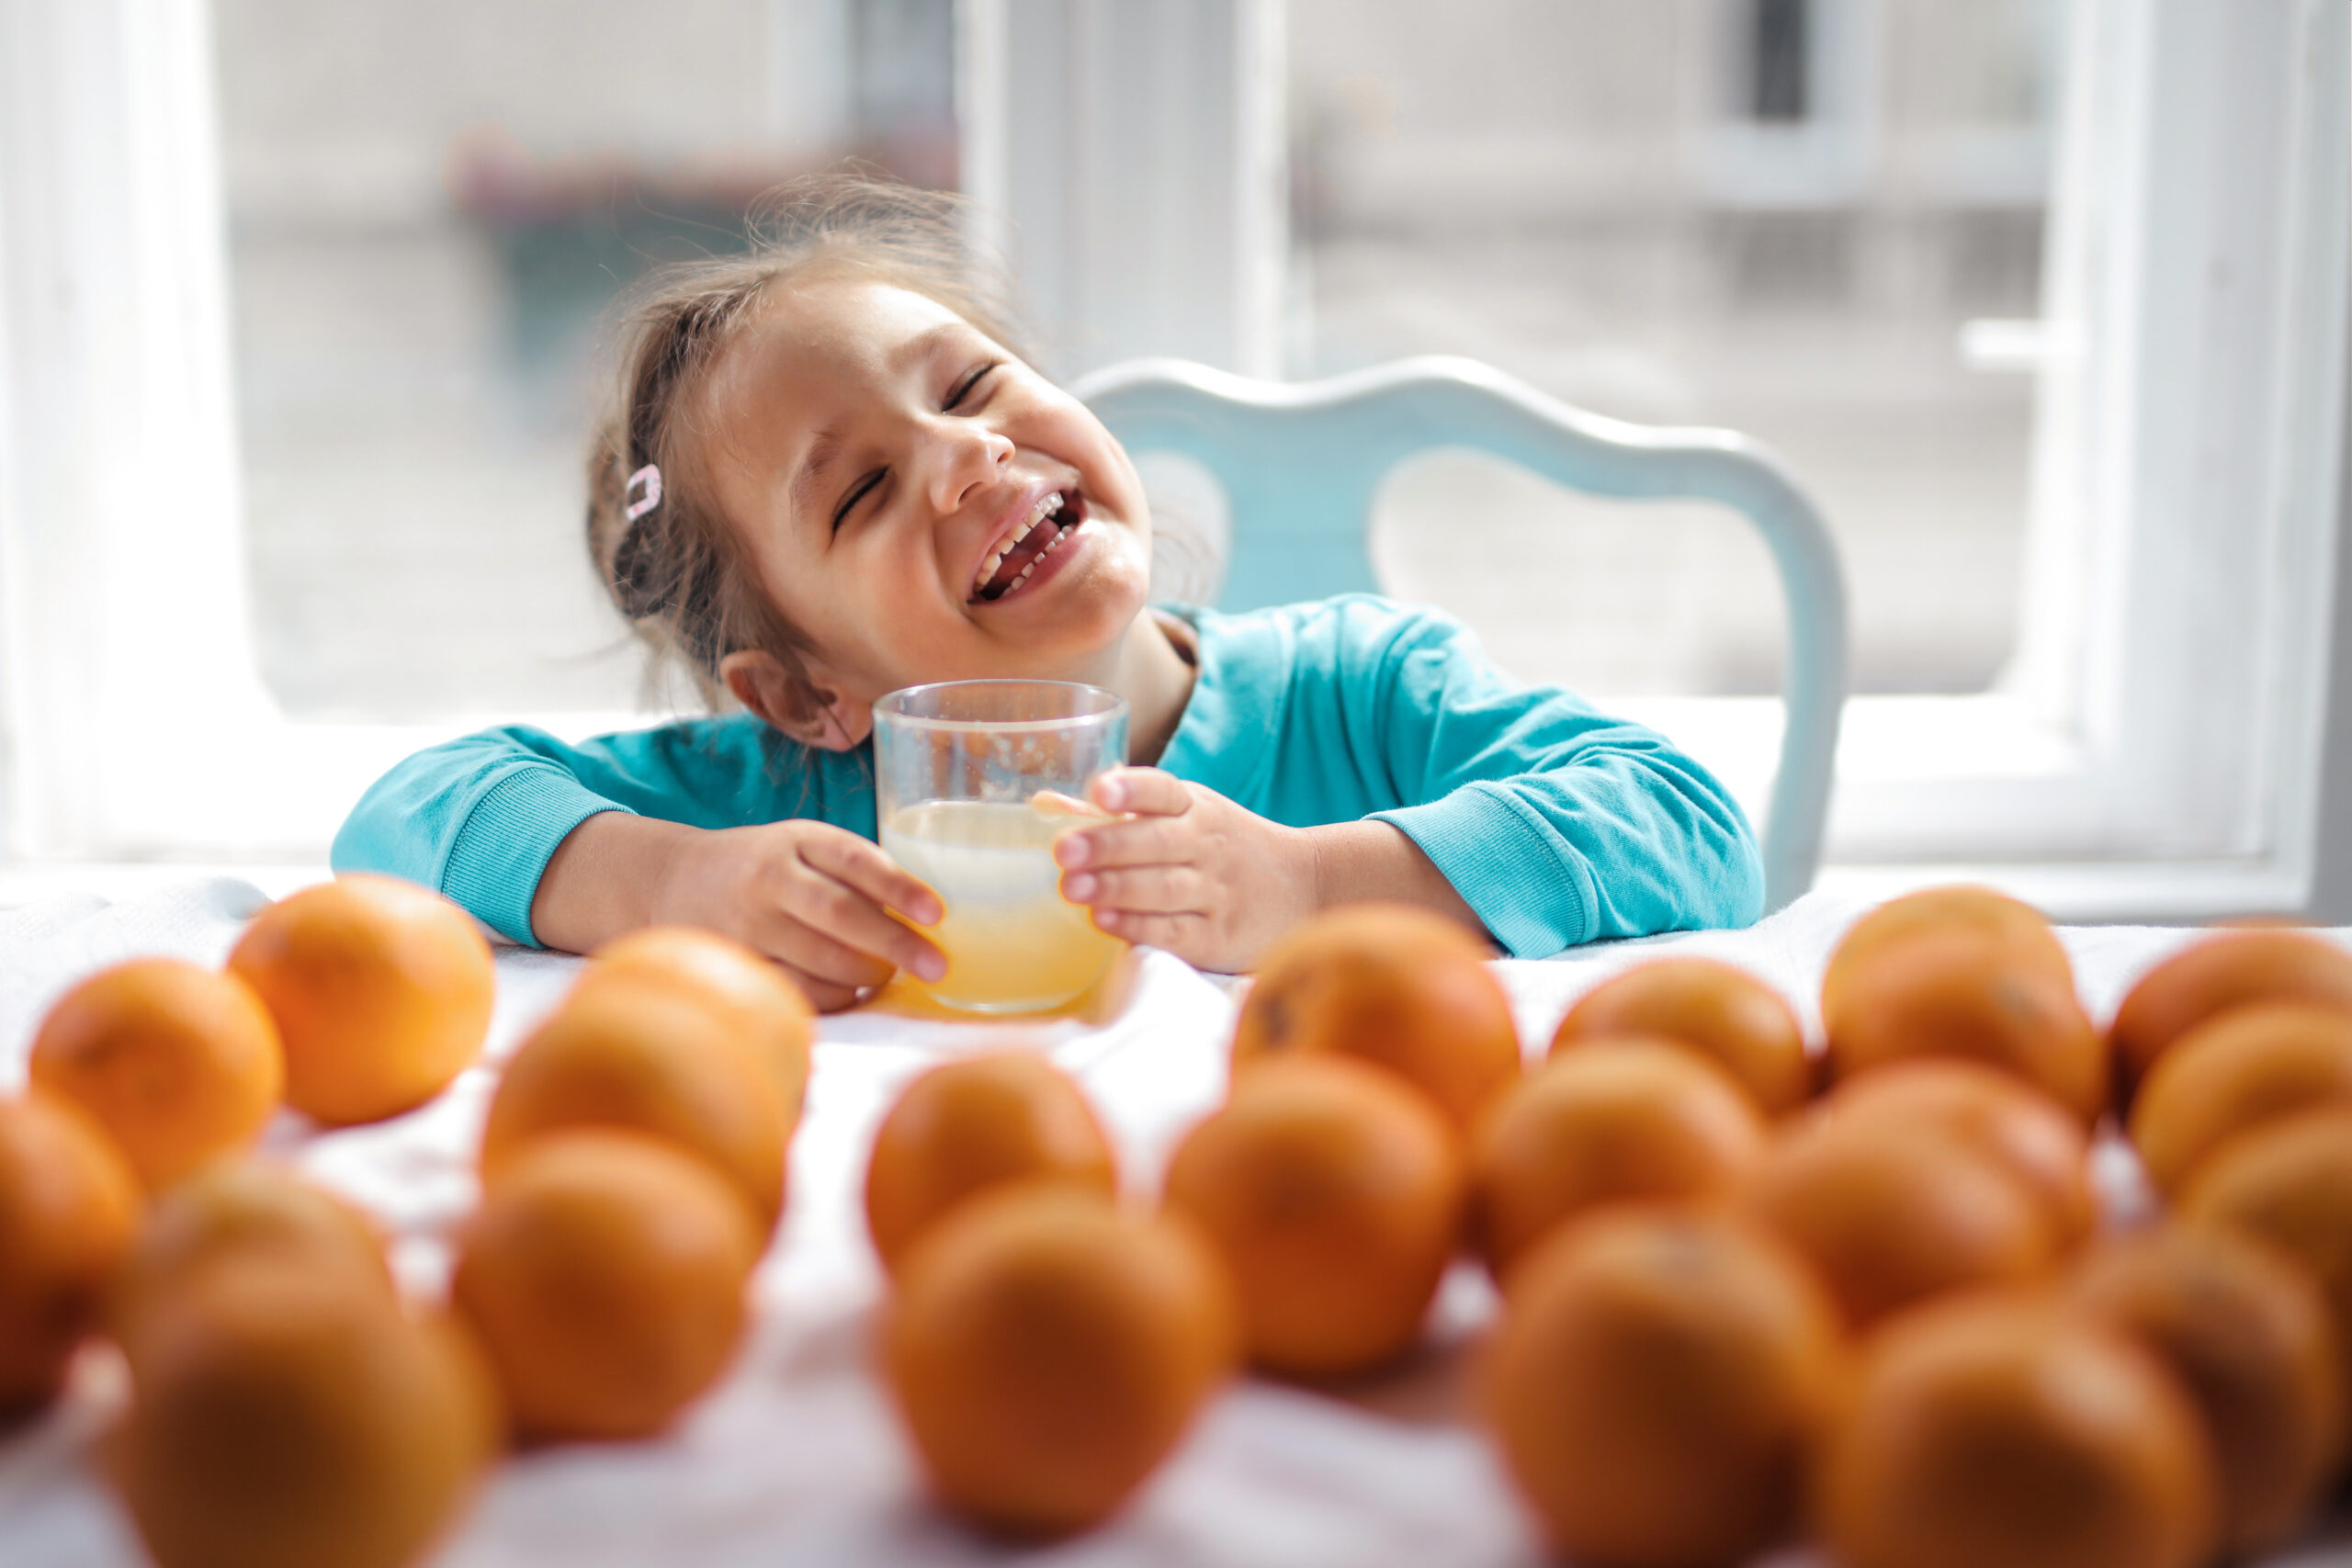 girl sitting at table with glass of orange juice and smiling. Oranges in foreground on table as illustrating healthy foods to eat during a mental health day